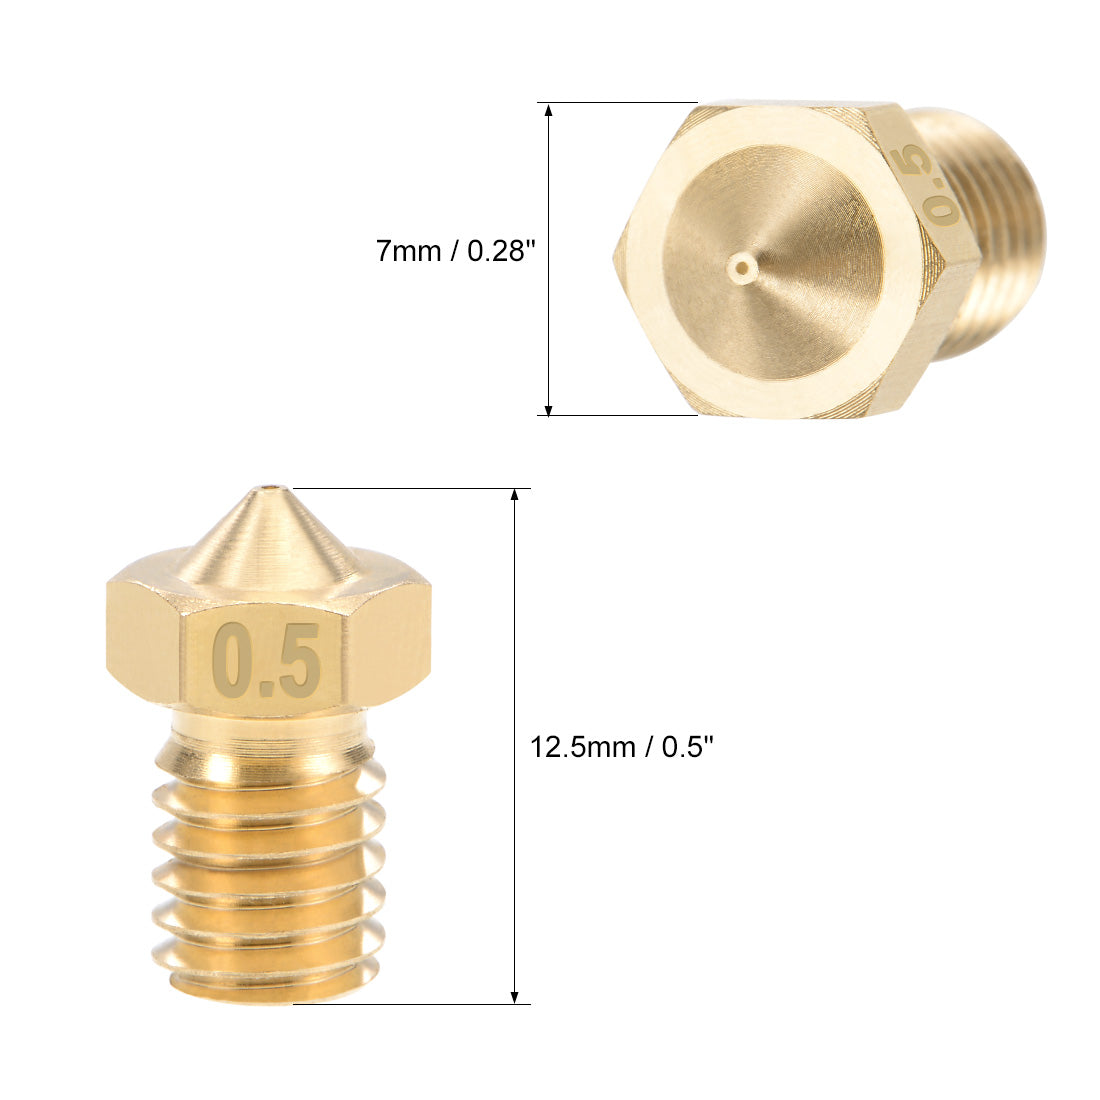 uxcell Uxcell 0.5mm 3D Printer Nozzle Head M6 for V5 V6 1.75mm Extruder Print, Brass 5pcs